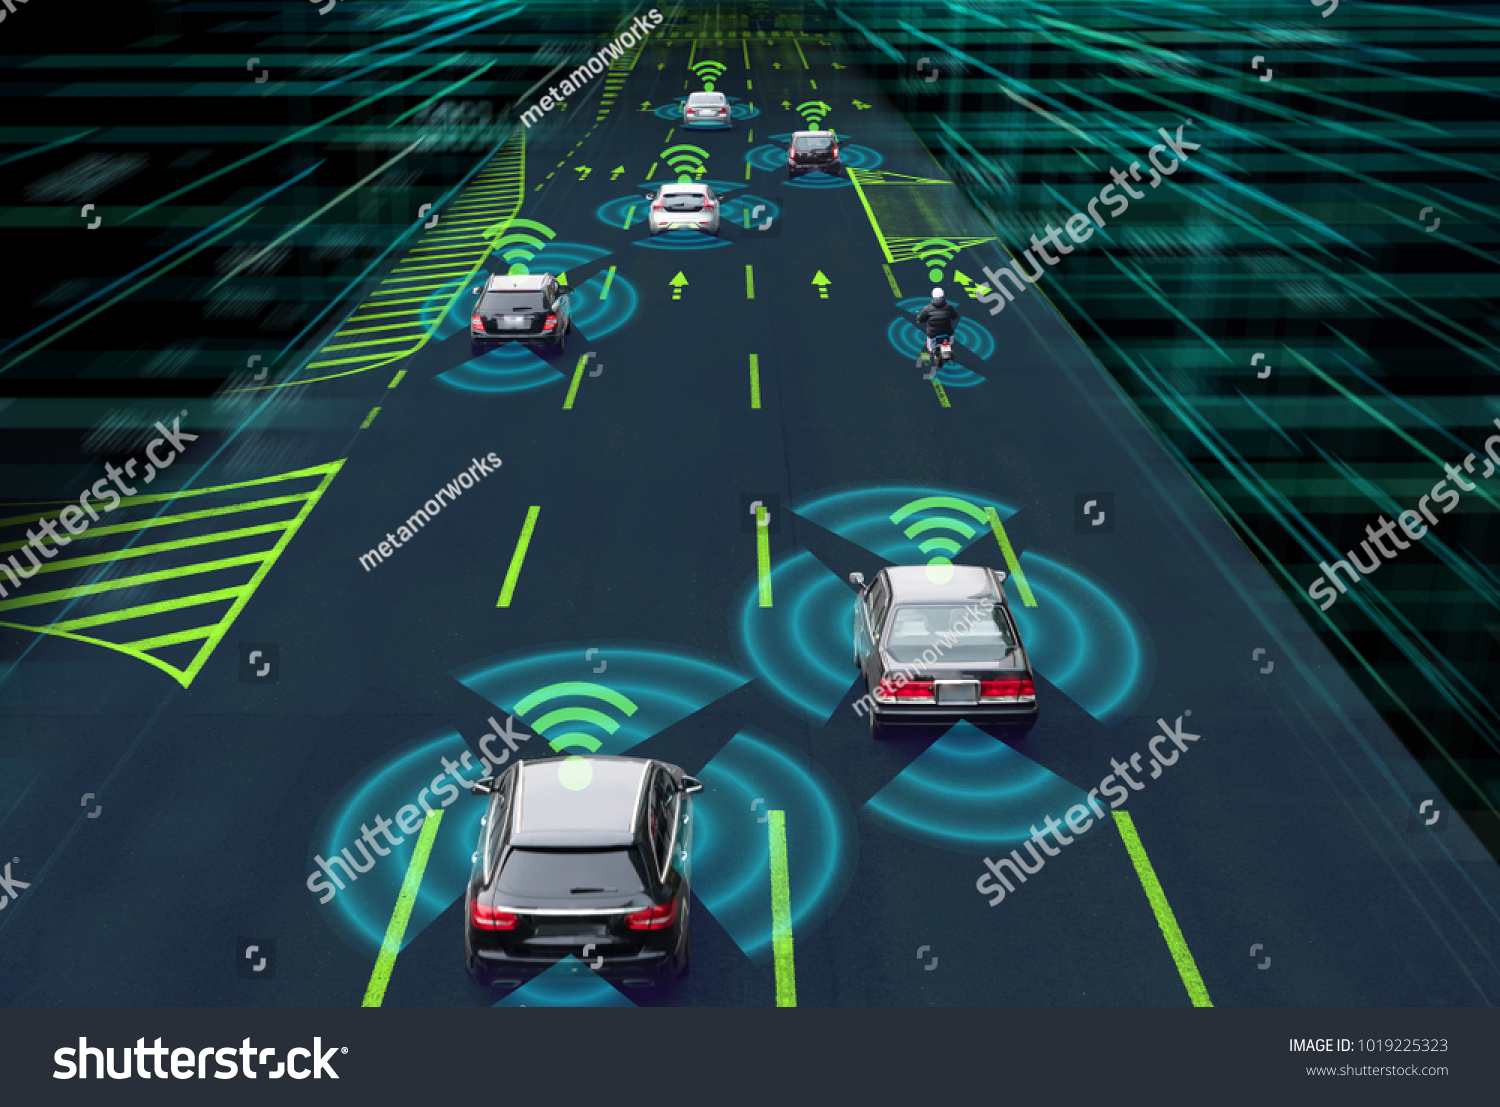 Sensing system and wireless communication network of vehicle. Autonomous car. Driverless car. Self driving vehicle.  #1019225323